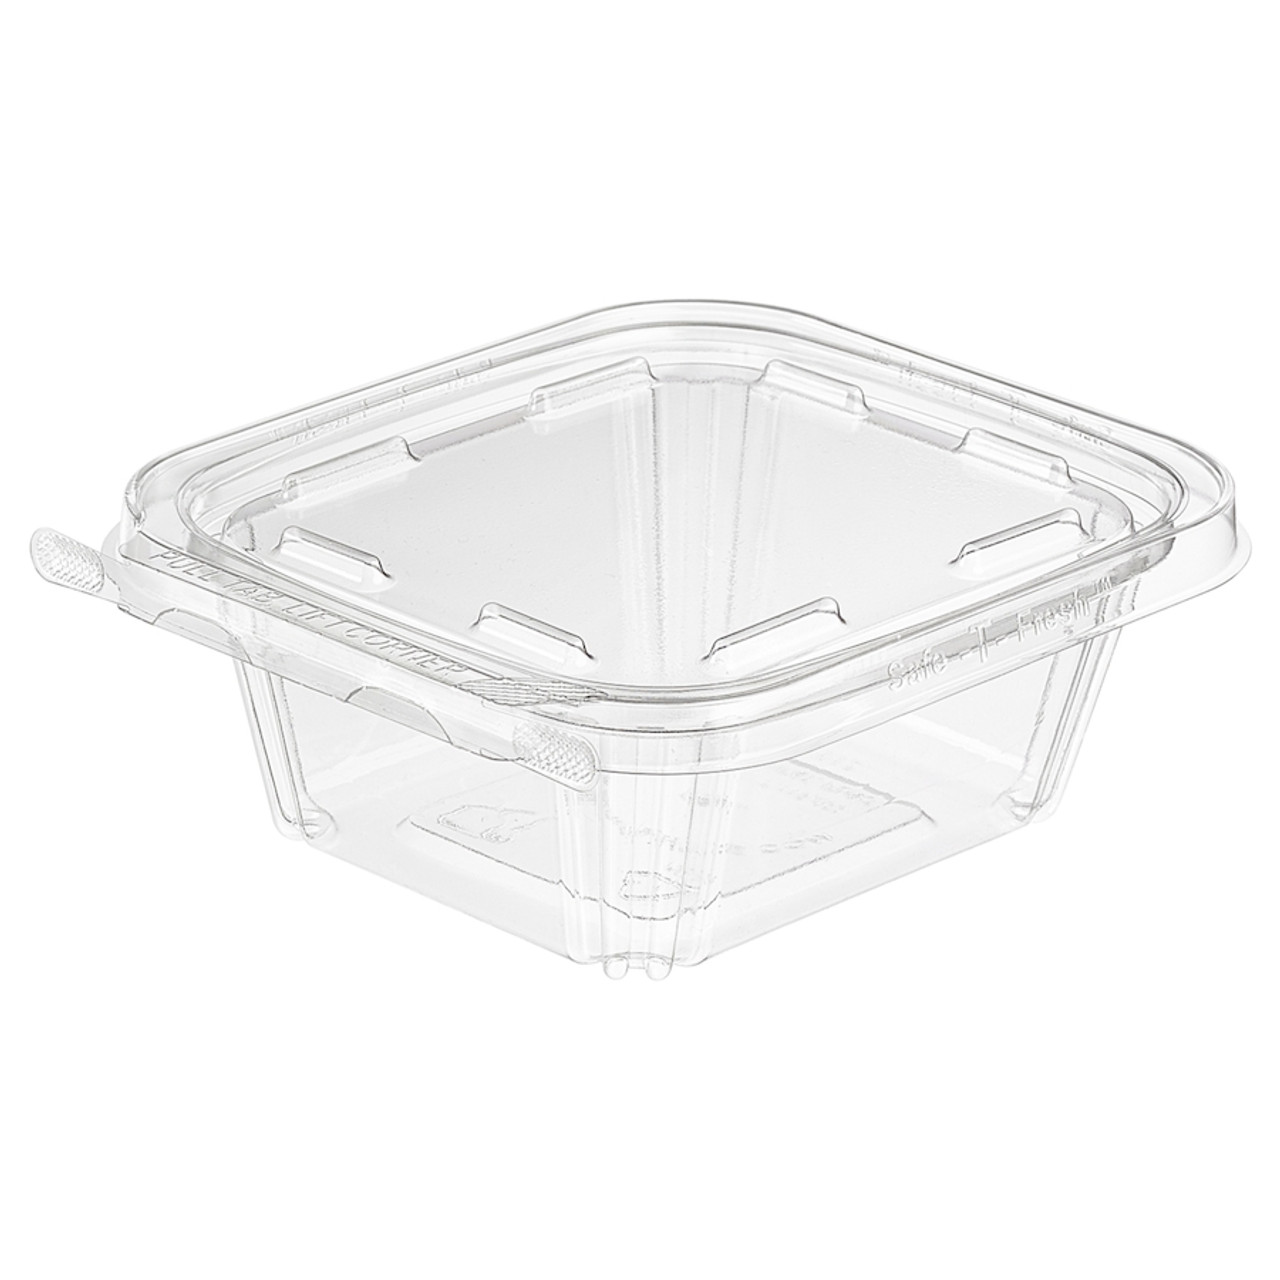 Inline Plastics Plastic Snack Container With Flat Lid 12 Oz. Clear